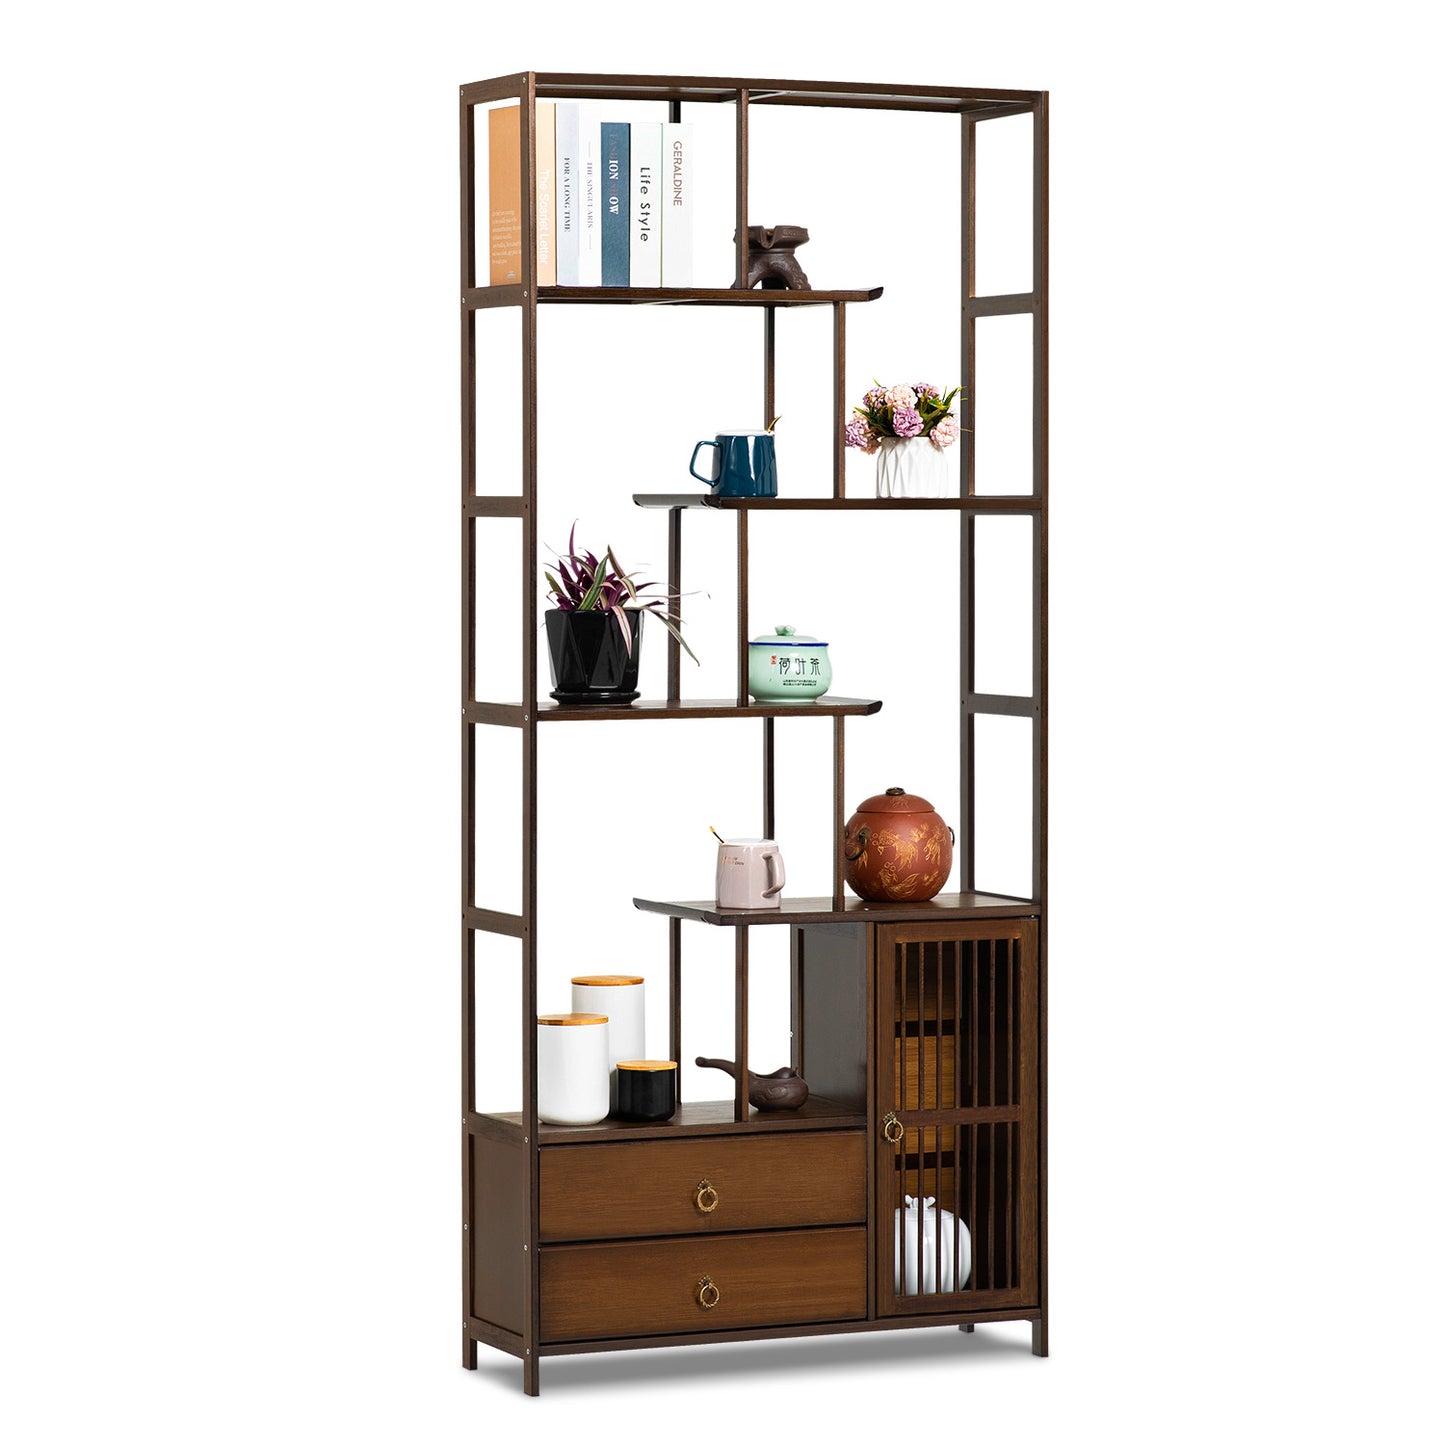 Chinese Etagere Fence Door Bottom Space Bookcase w/Dual Drawers - Brown